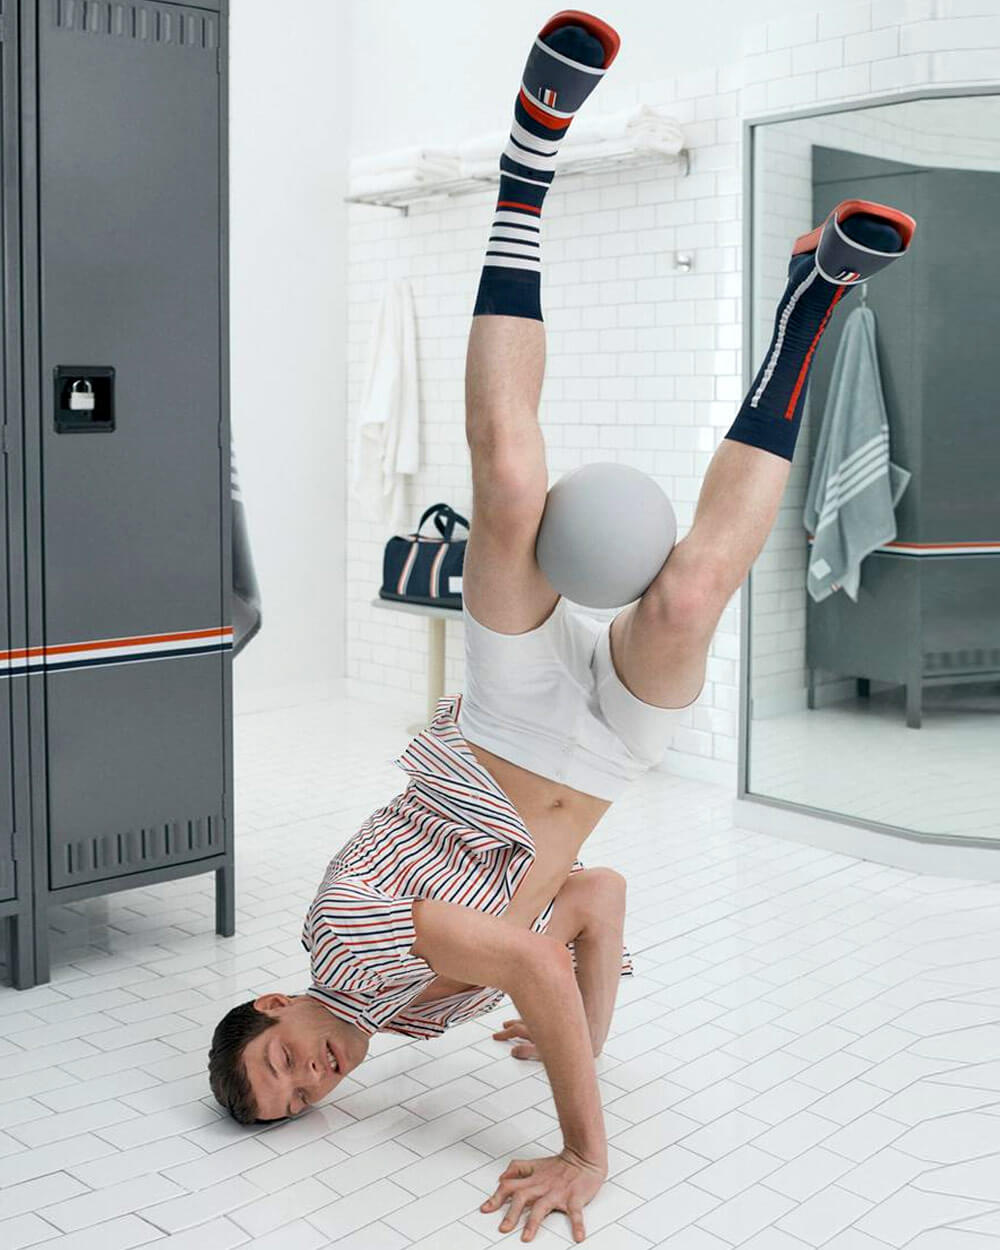 THOM BROWNE sports-inspired collection for Nordstrom’s New Concepts